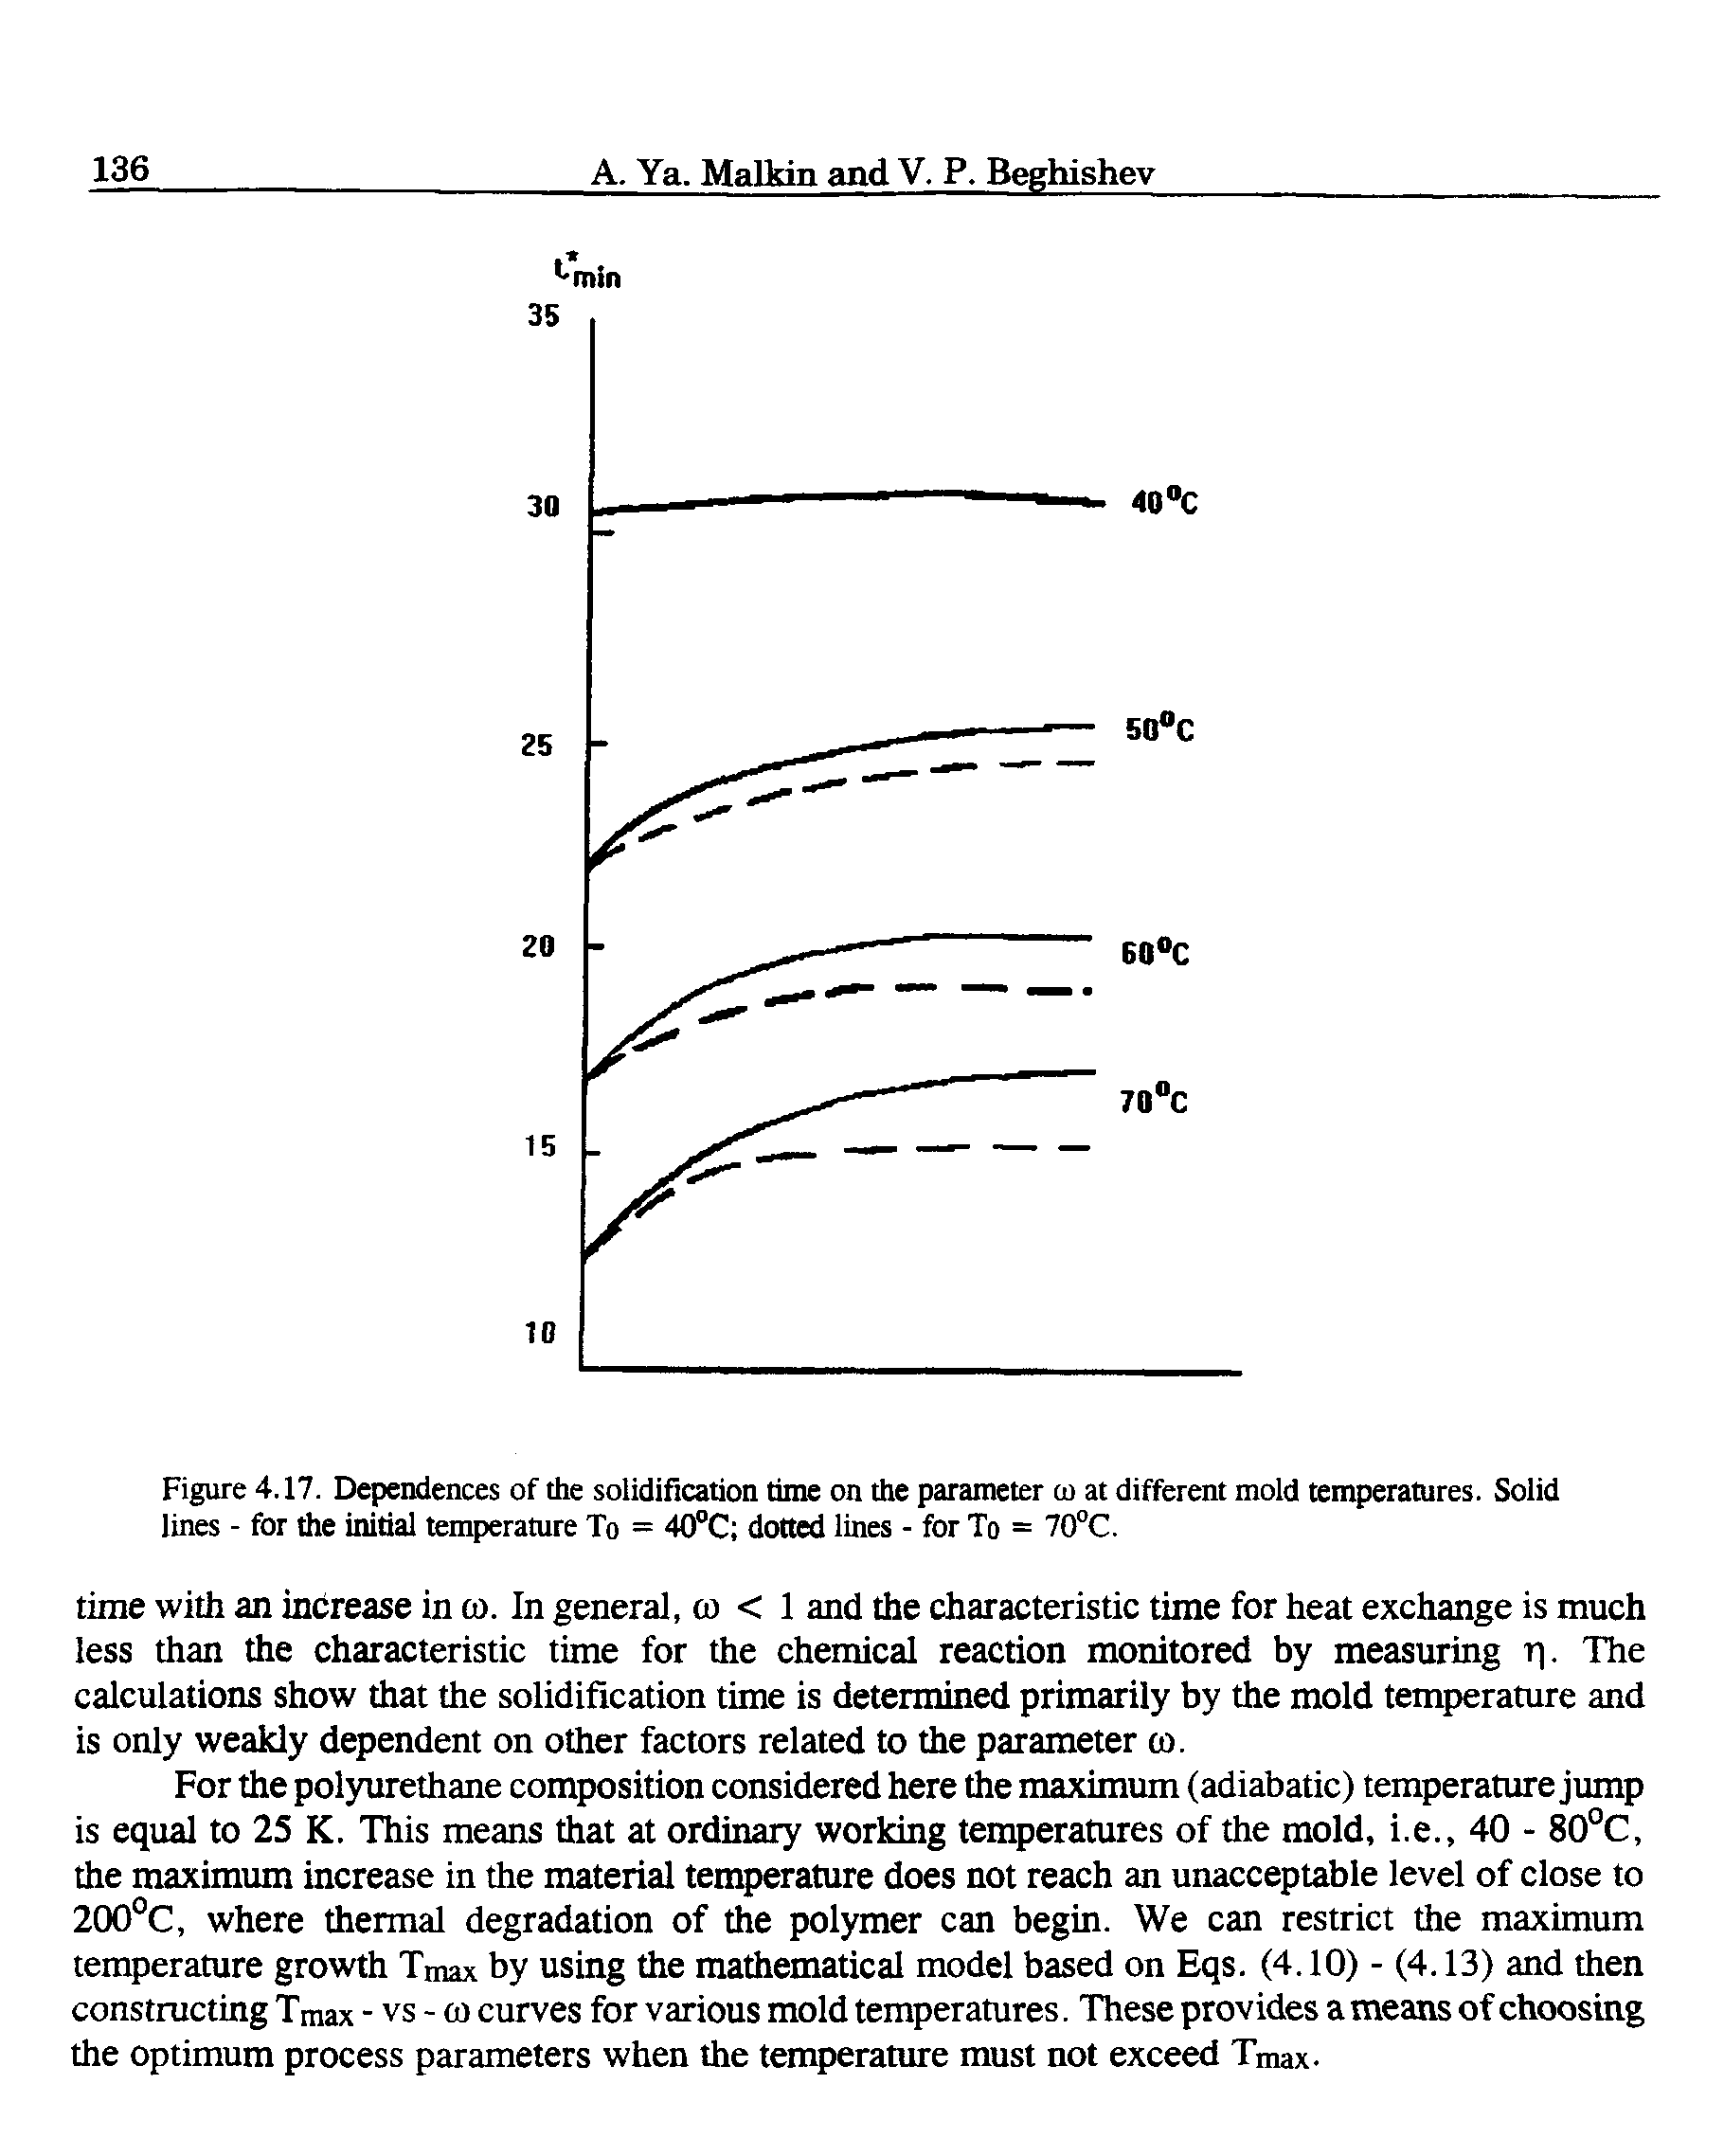 Figure 4.17. Dependences of the solidification time on the parameter cu at different mold temperatures. Solid lines - for the initial temperature To = 40°C dotted lines - for To = 70°C.